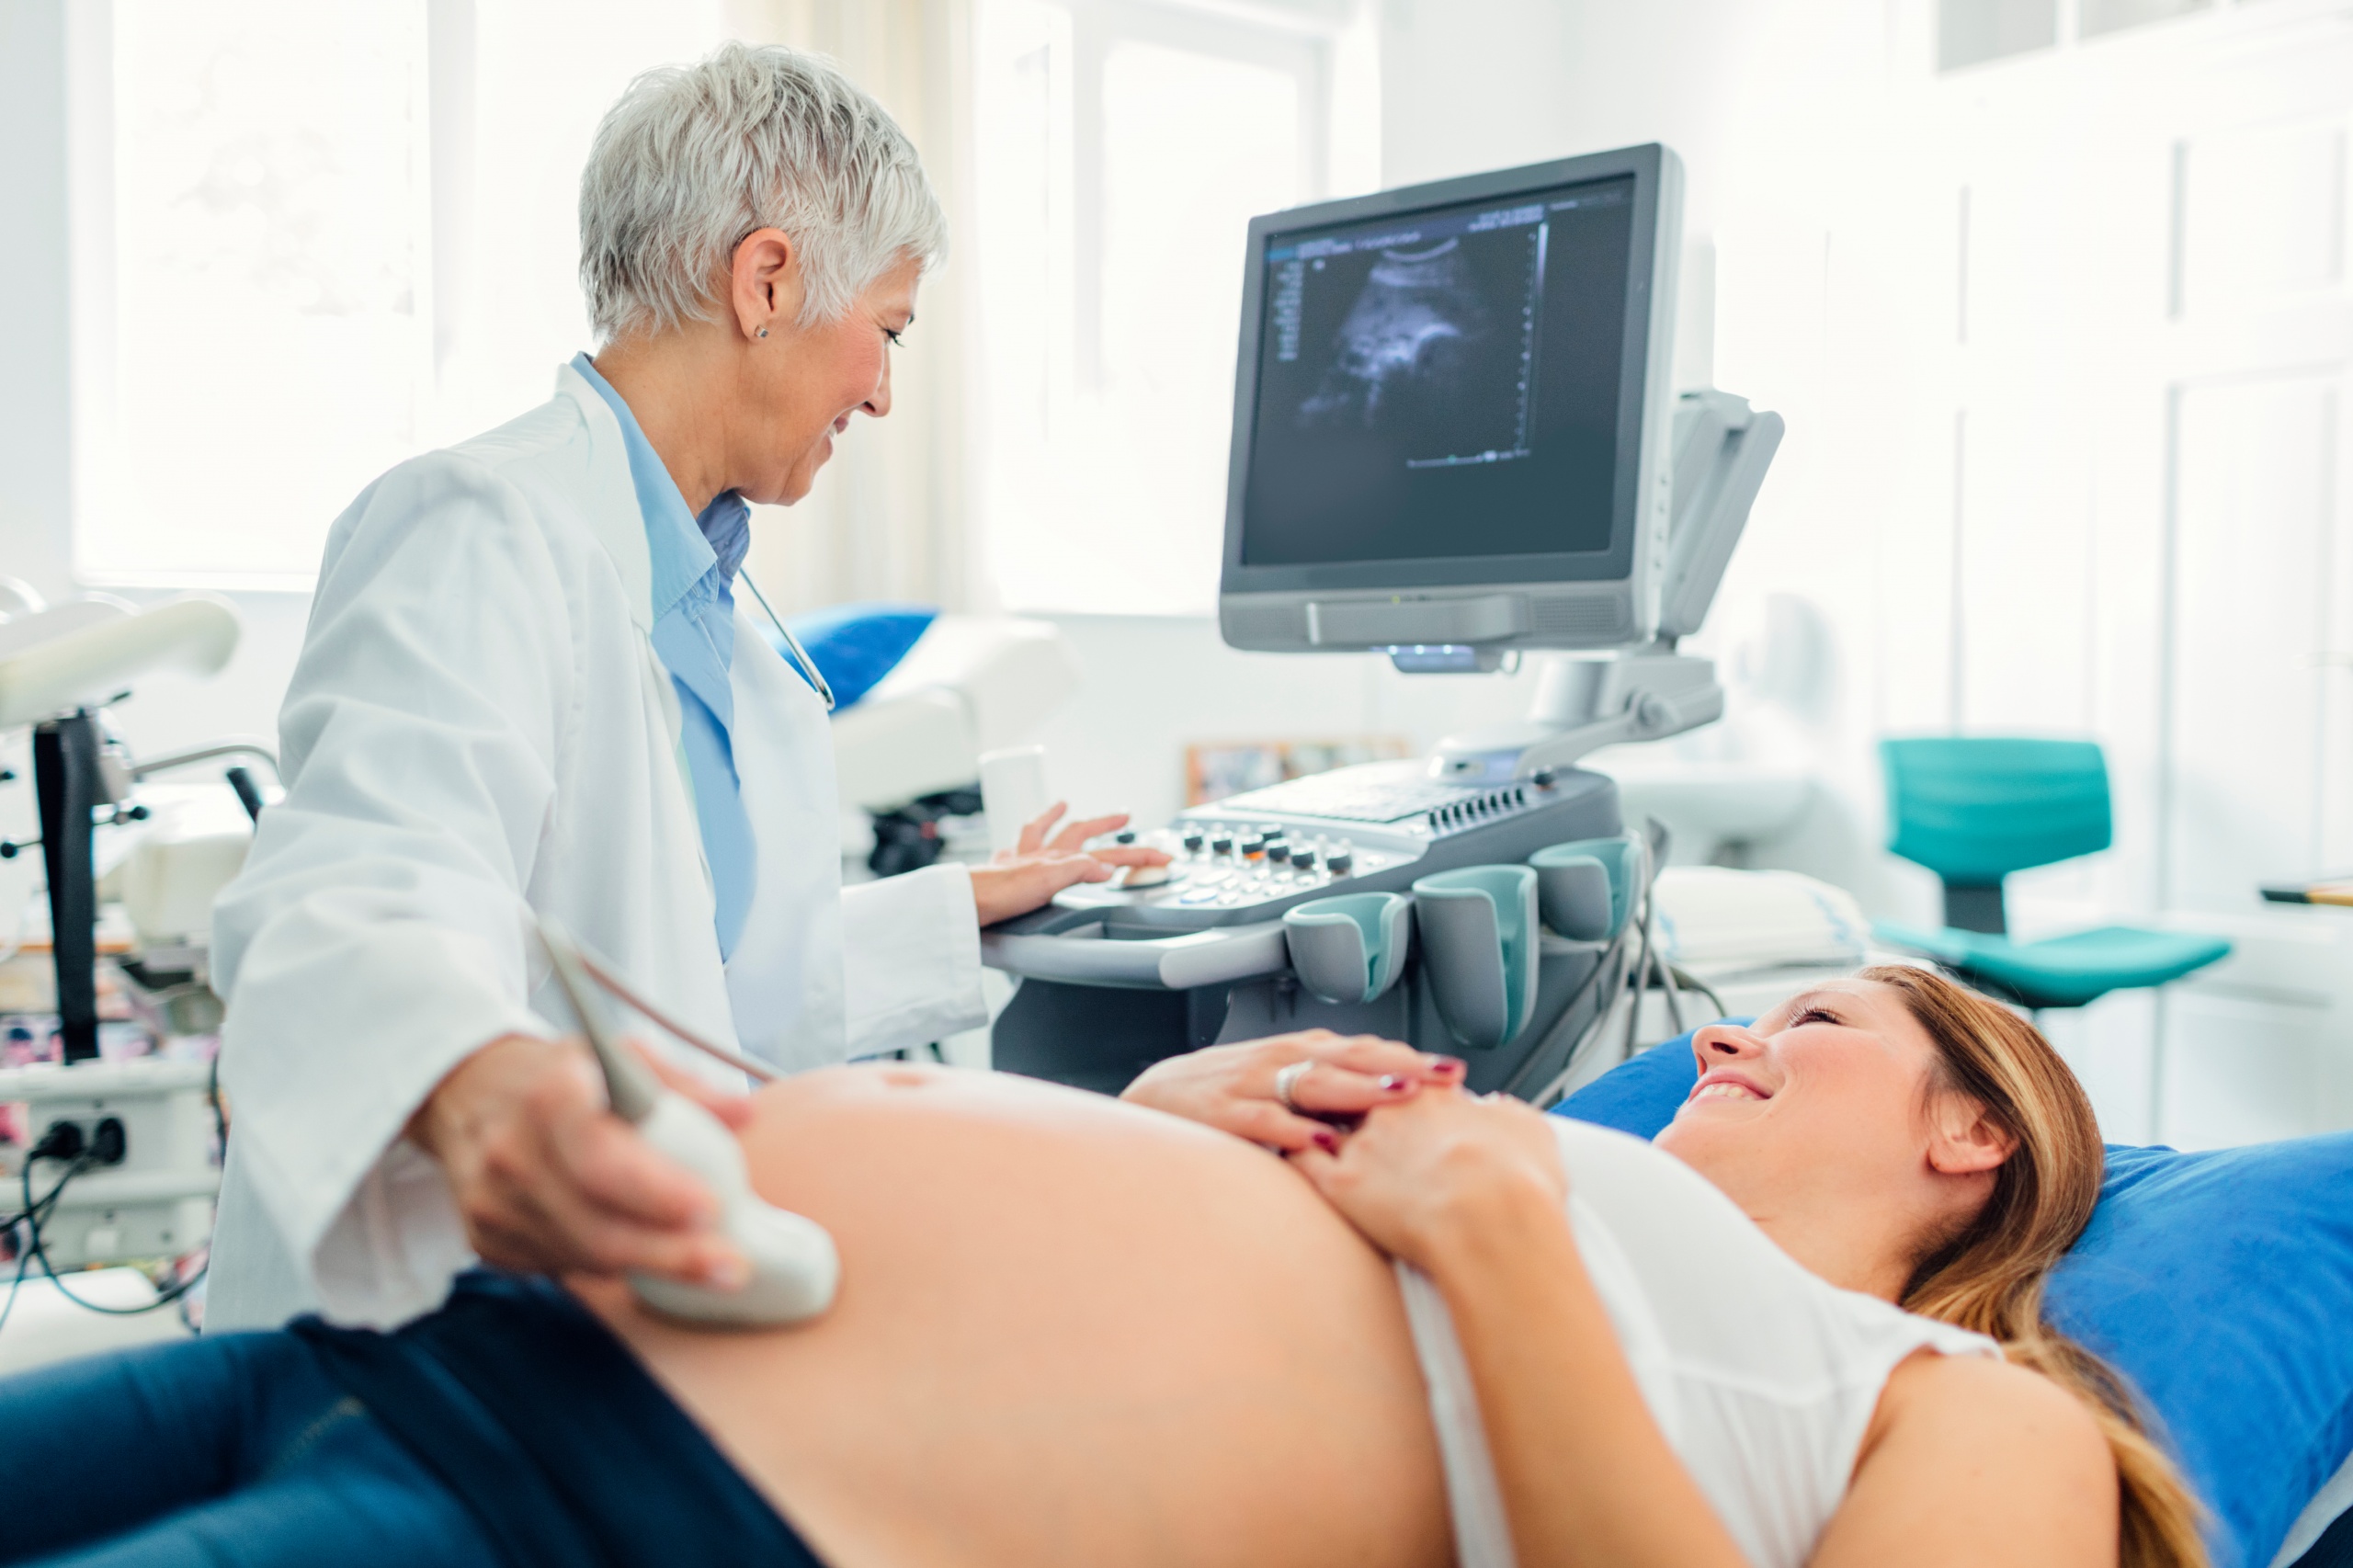 Pregnant woman and her male doctor in a consultation. Woman lying down while her doctor doing ultrasound examination. Young woman looking at her doctor.